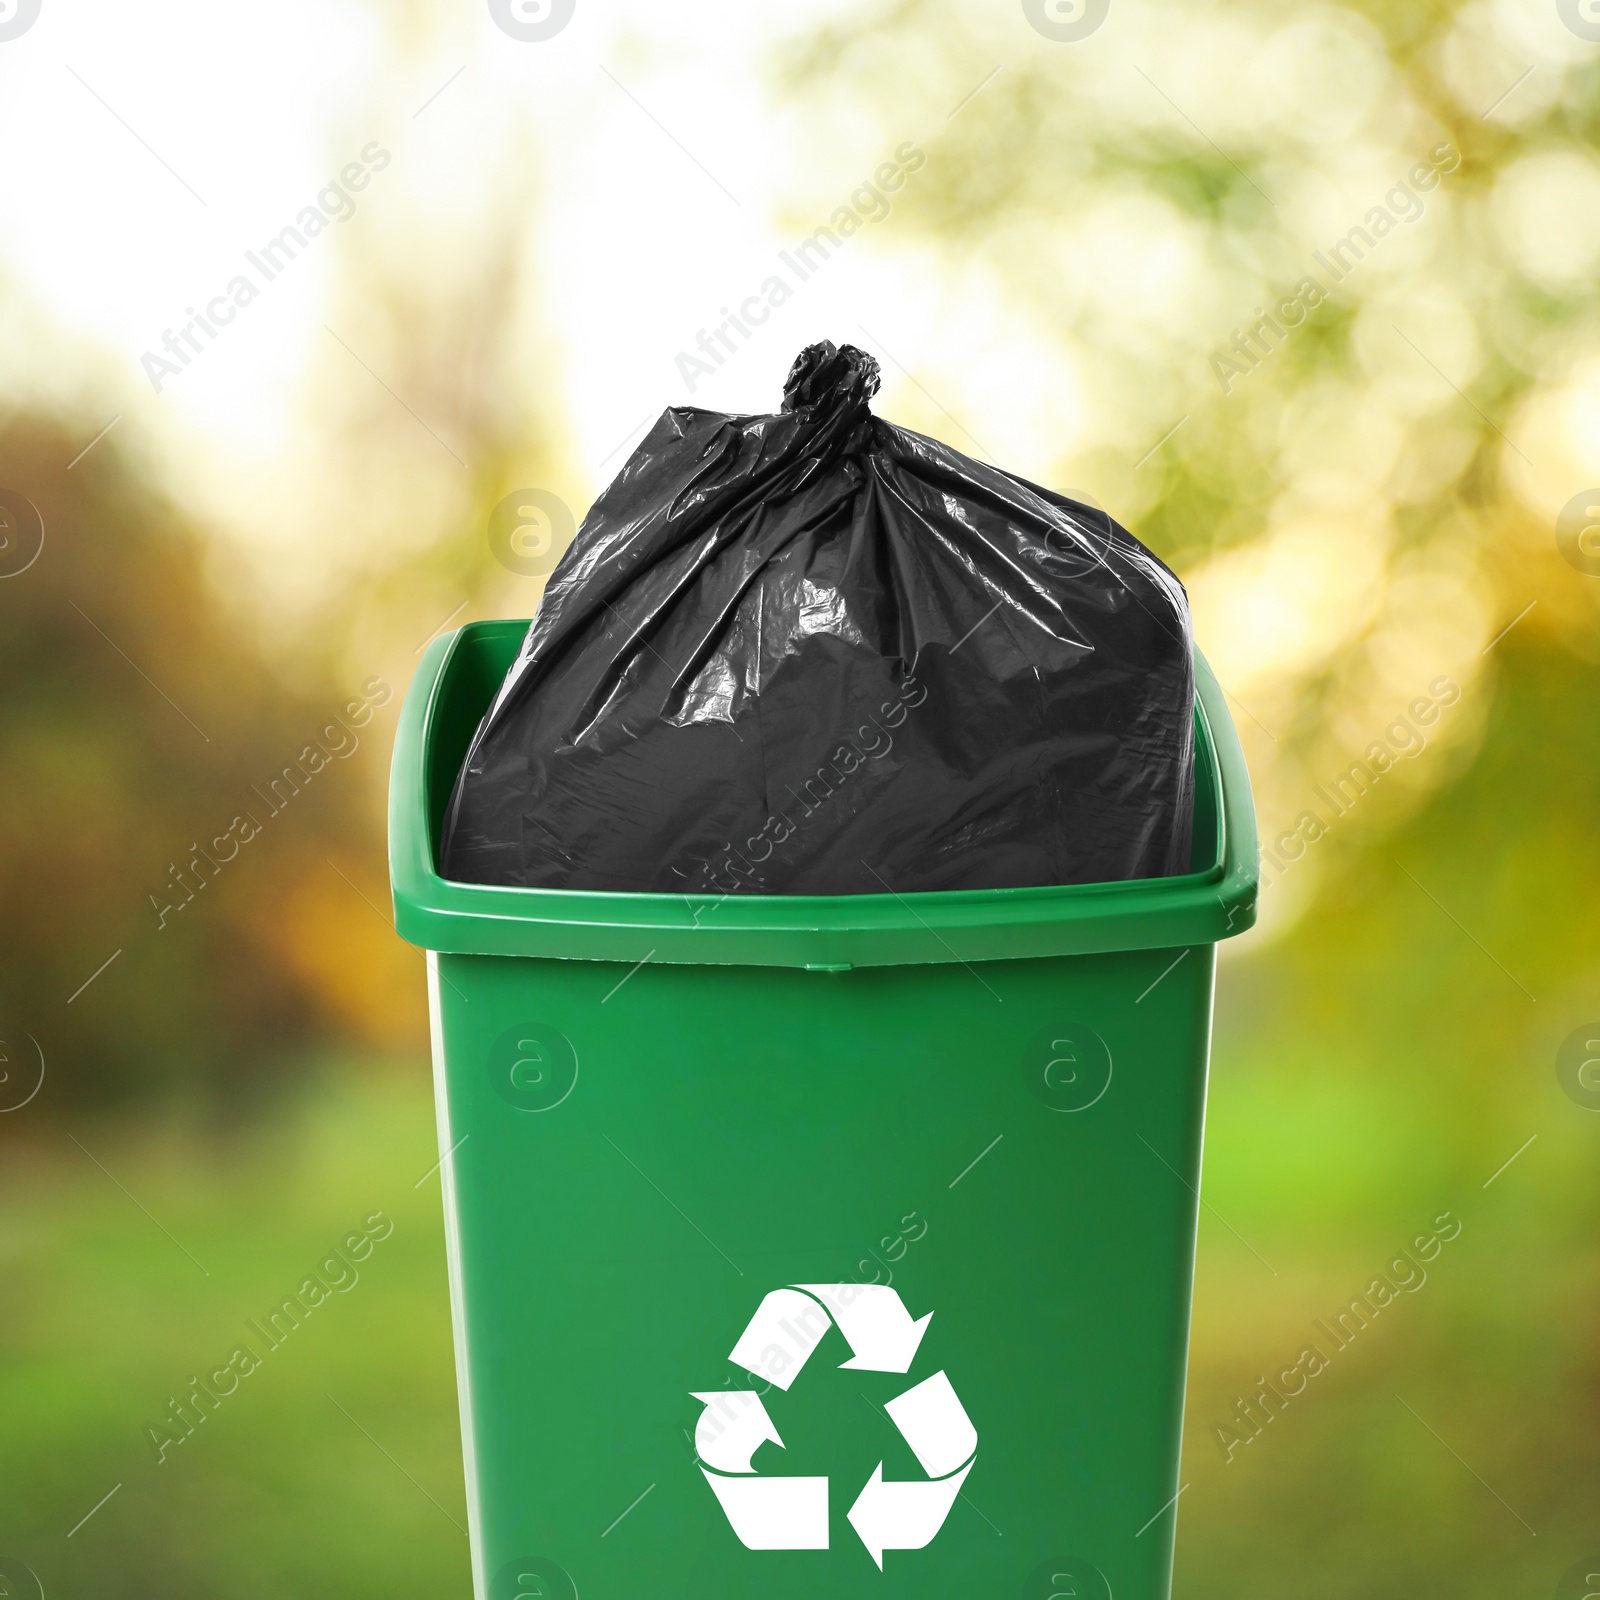 Image of Waste bin with plastic bag full of garbage on blurred background